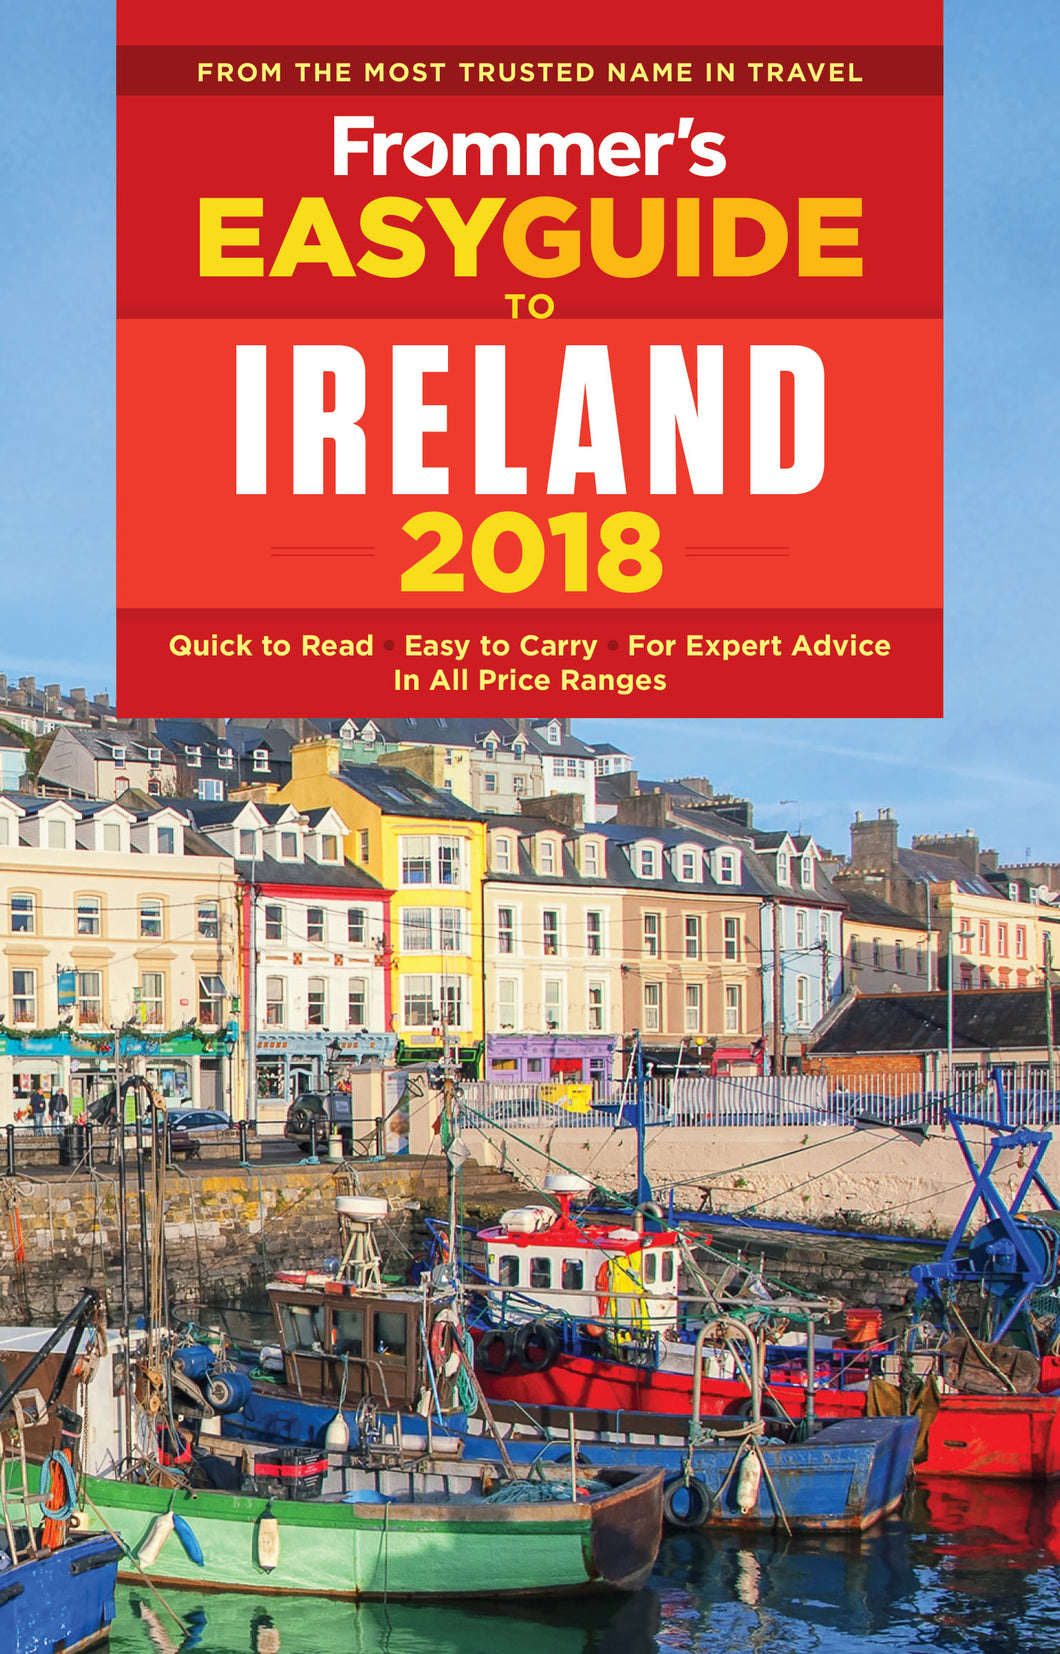 Frommer's EasyGuide to Ireland 2018